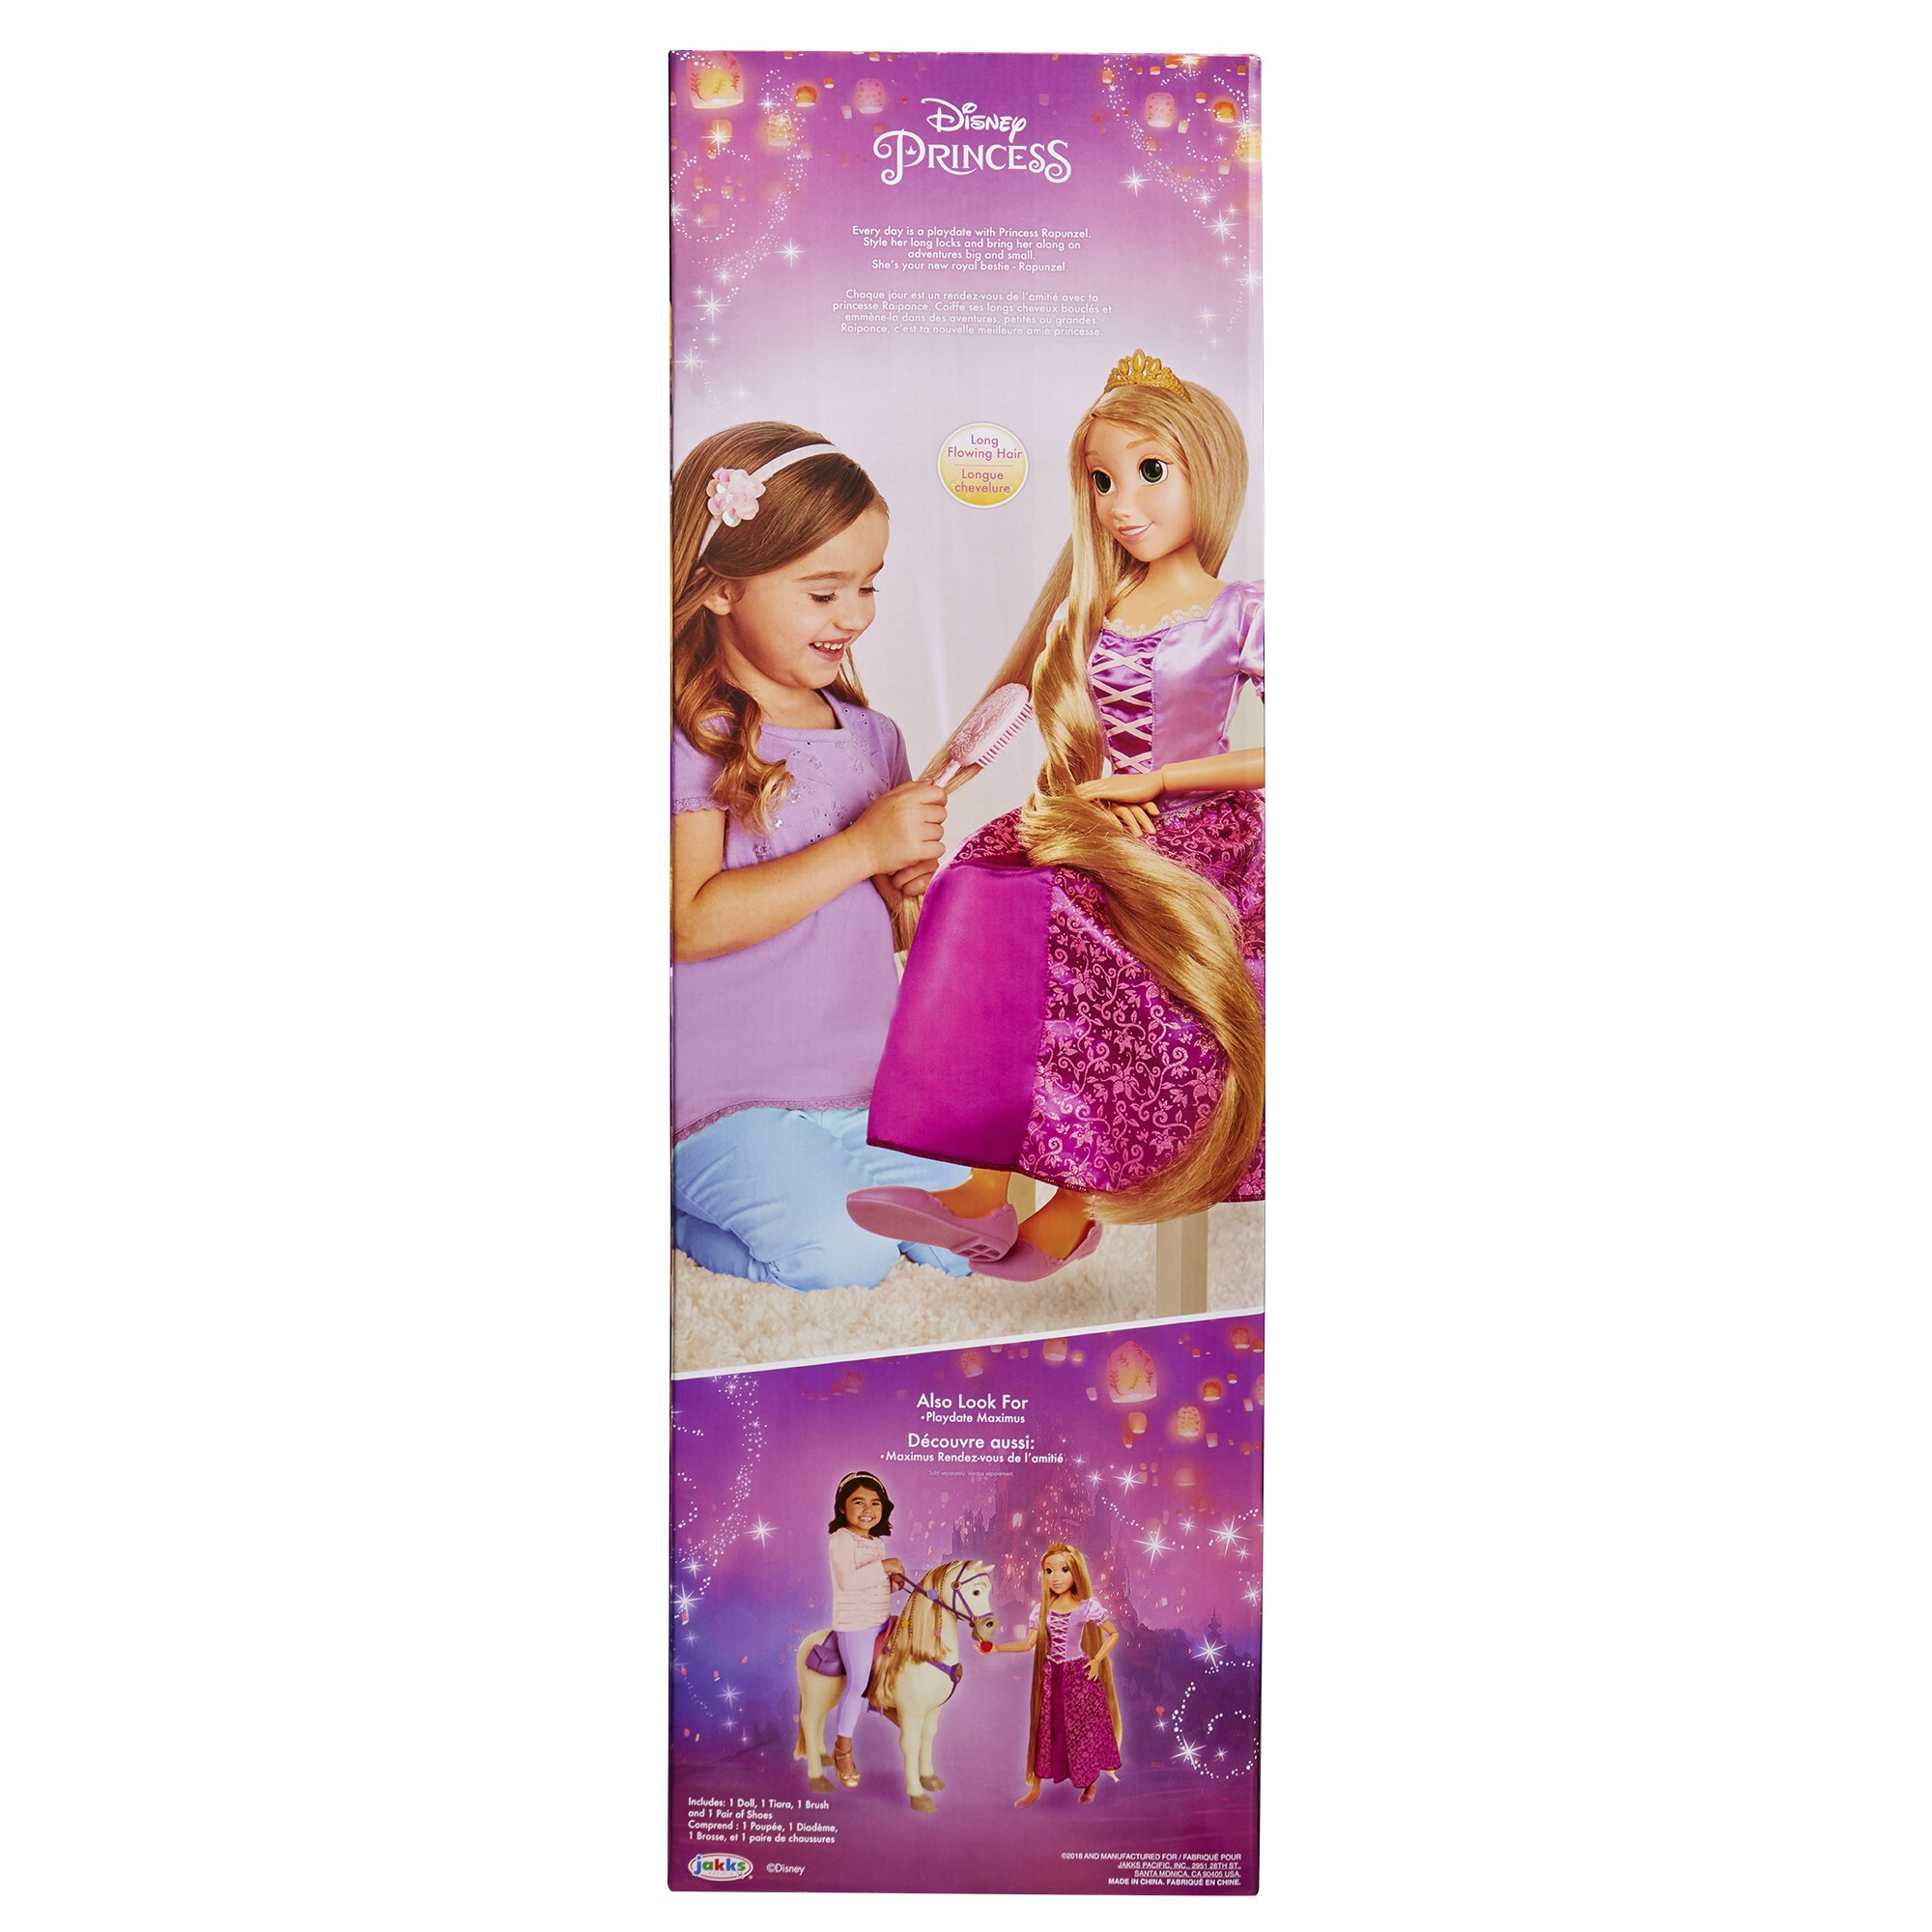 Disney Princess Rapunzel 32 Playdate Removable Shoes & A Tiara Comes with Brush to Comb Her Long Golden Locks Movie Inspired Purple Dress My Size Articulated Doll 